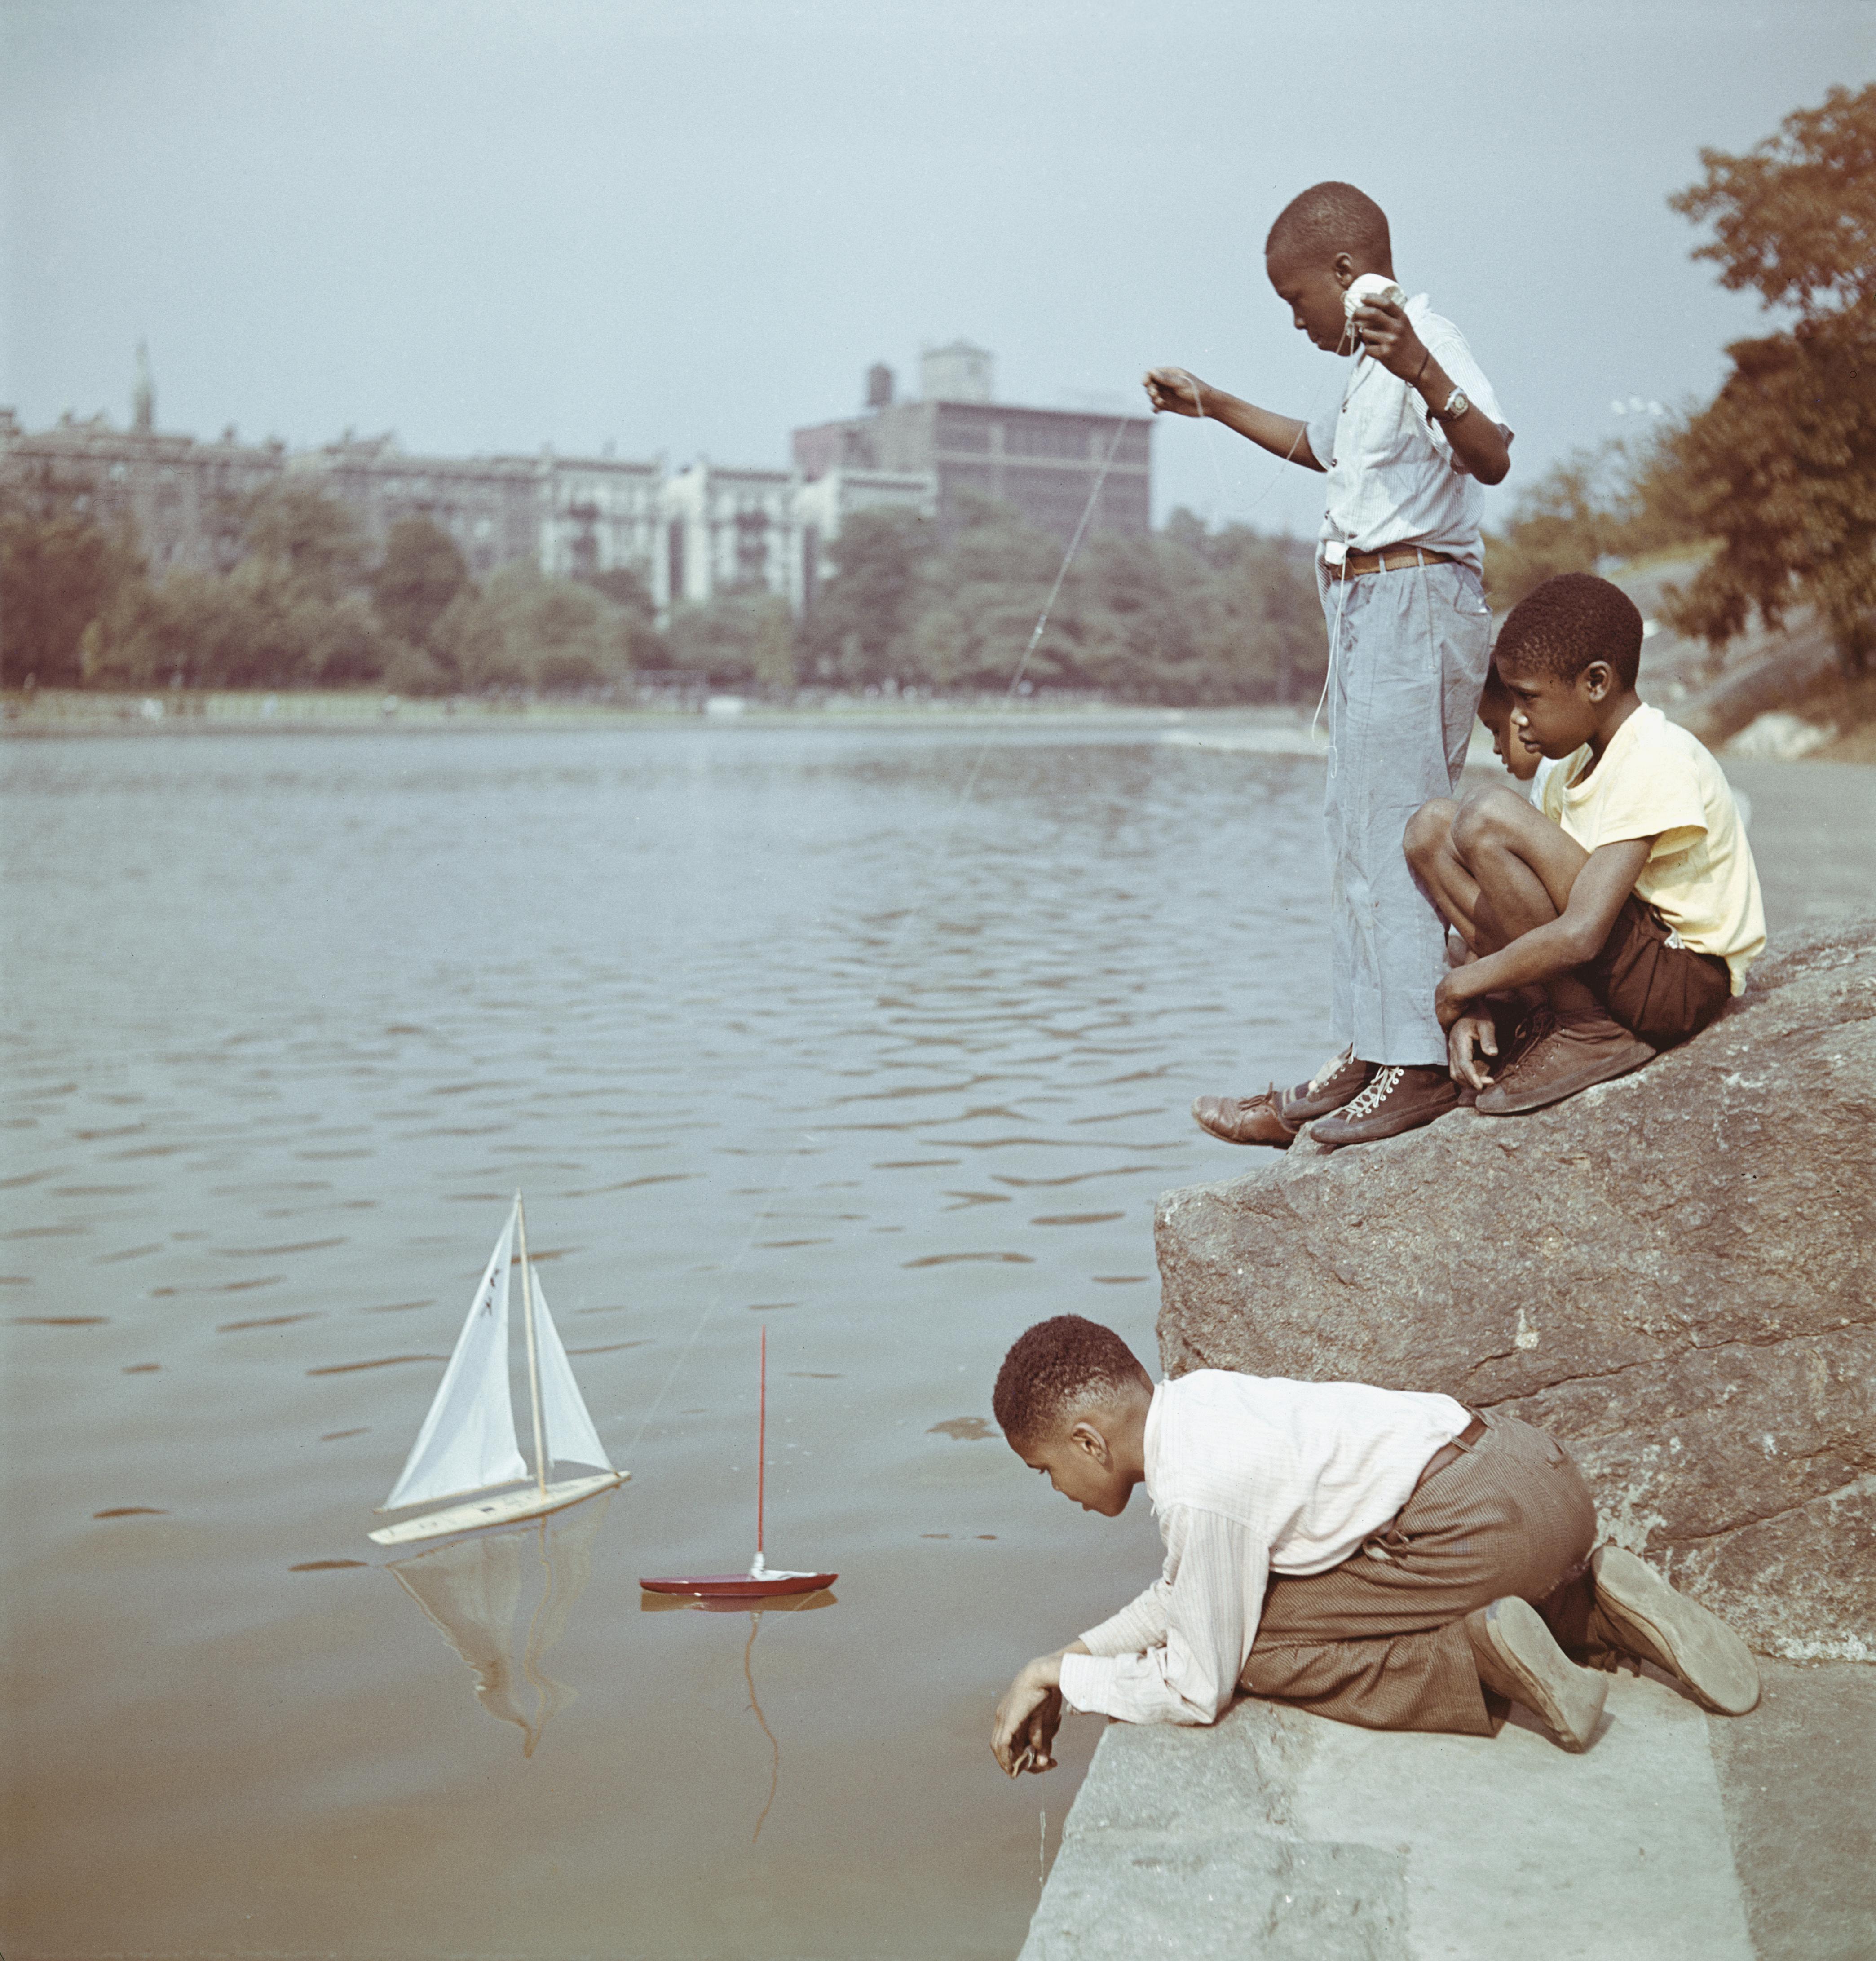 Slim Aarons Color Photograph - Model Boat Sailing in Central Park NYC, Estate Edition Photograph, Children Play